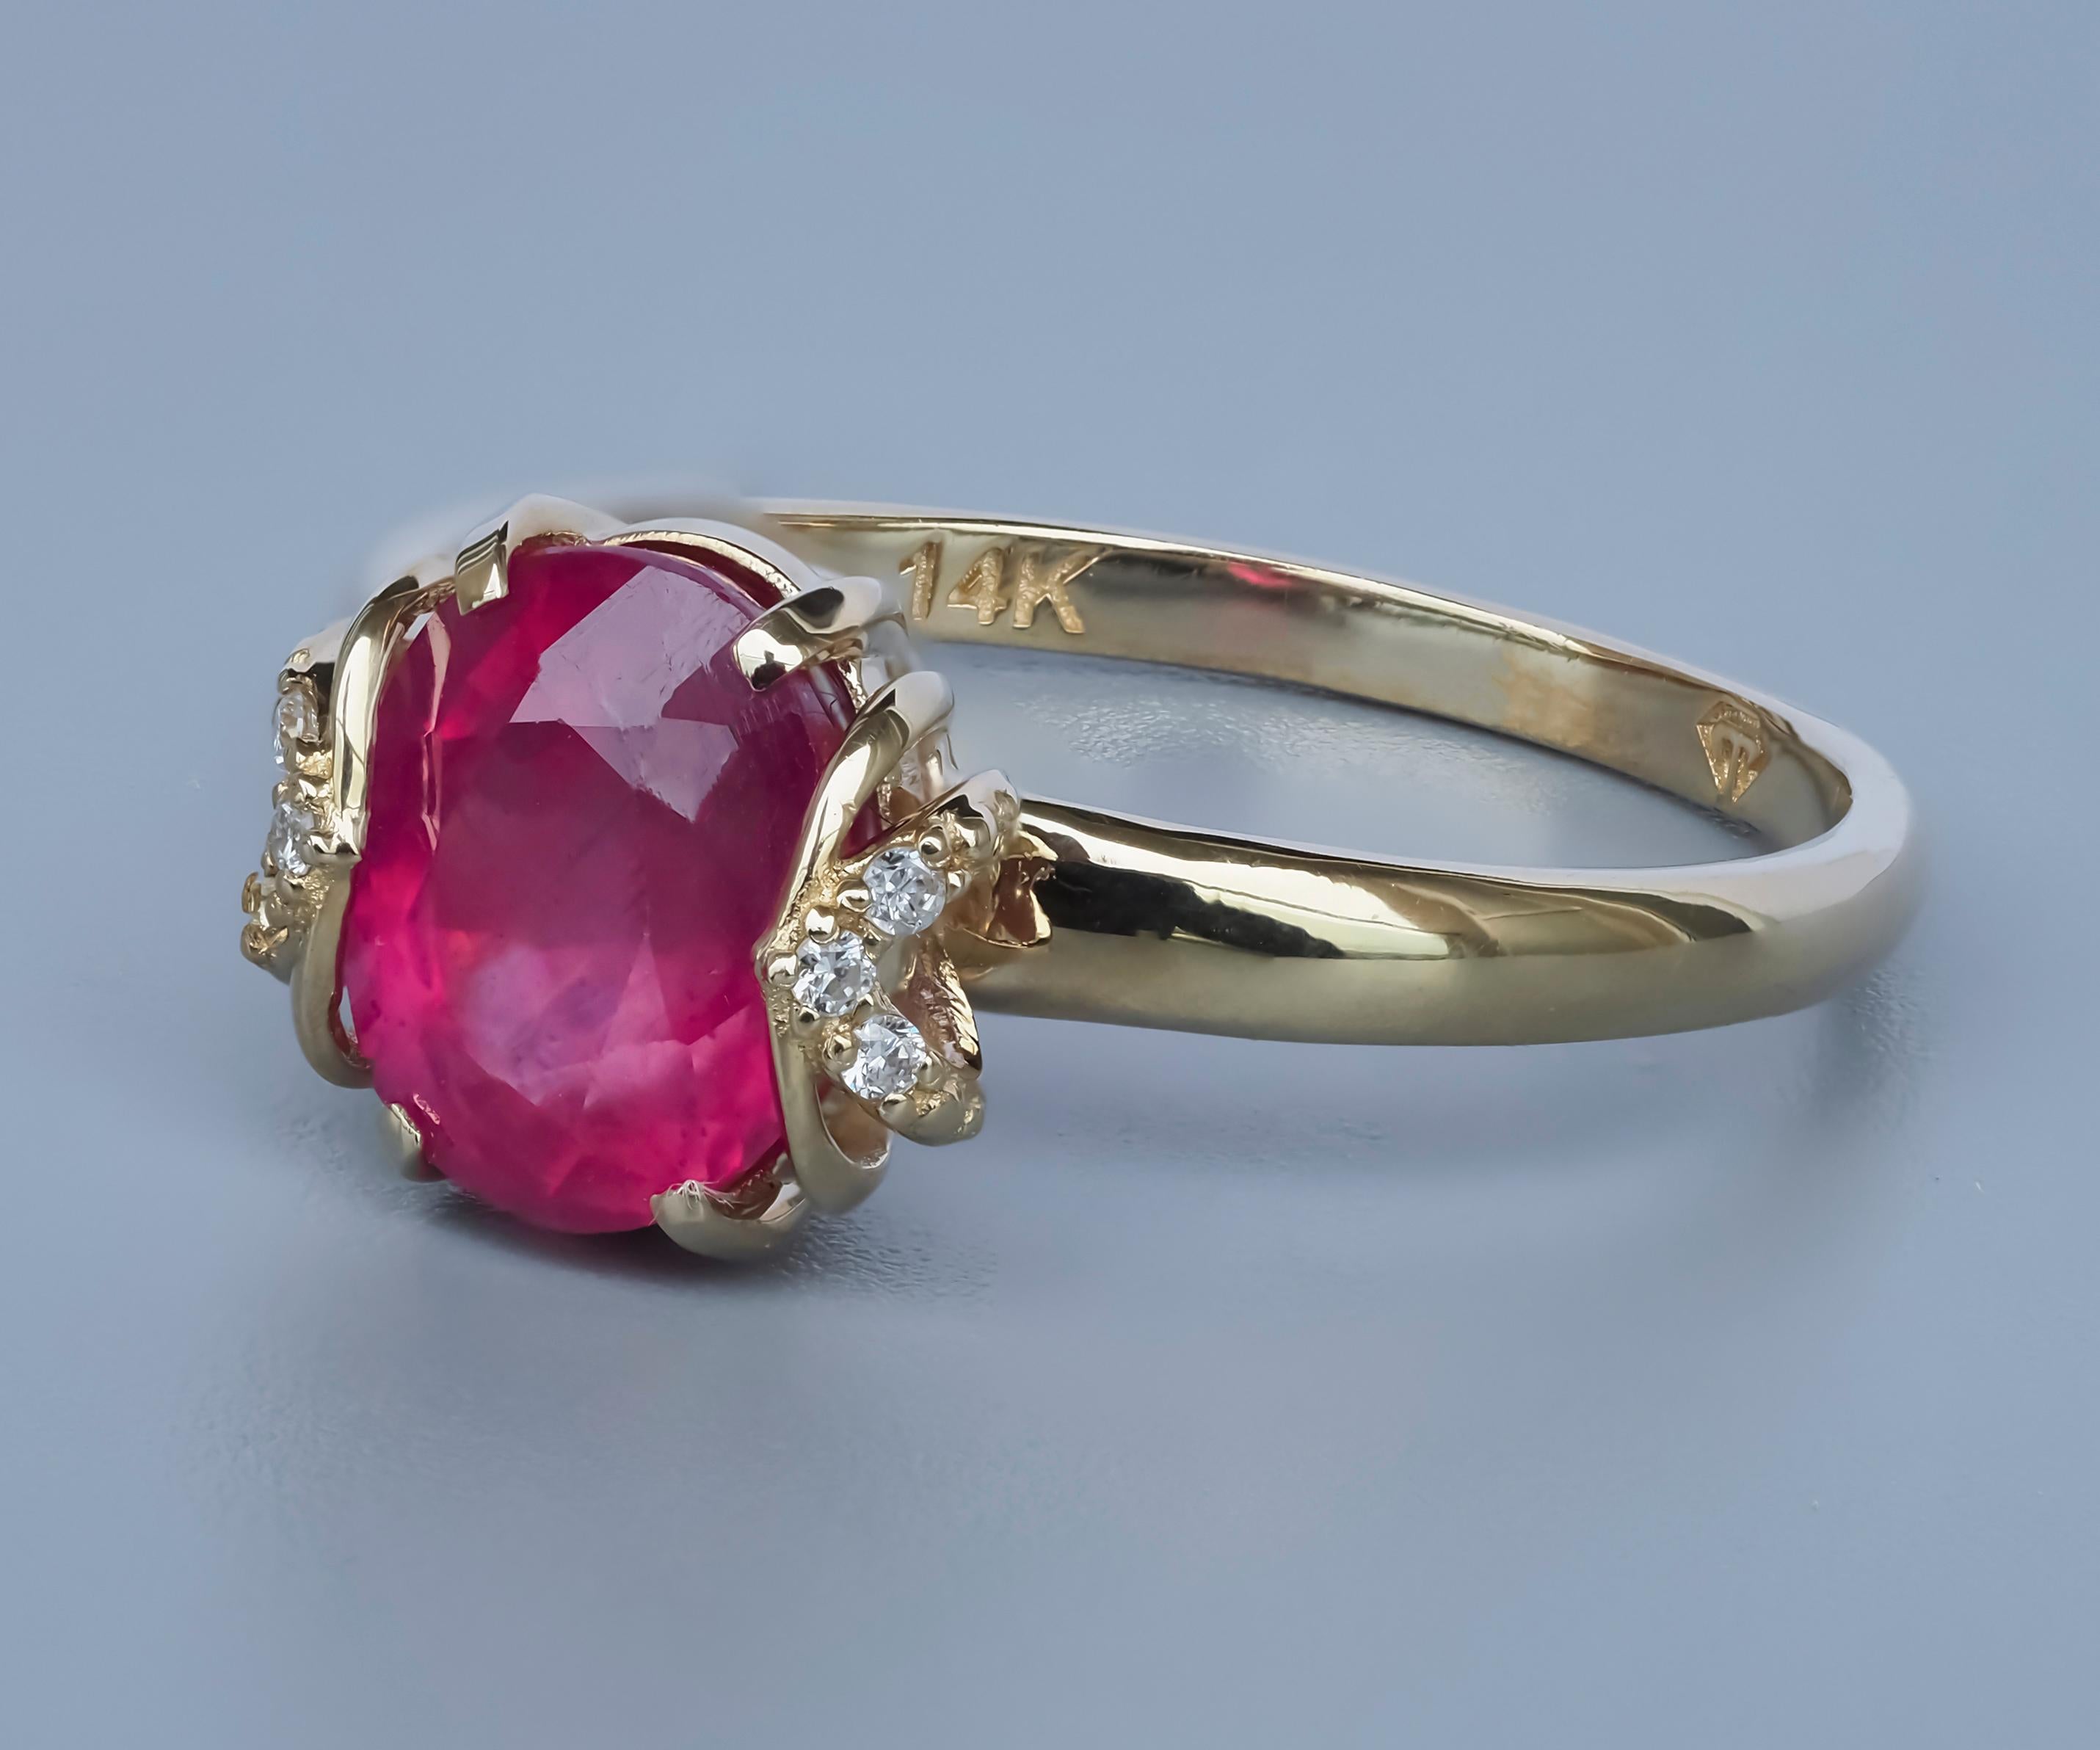 For Sale:  14 Karat Gold Ring with Ruby and Diamonds. Oval ruby ring! 3